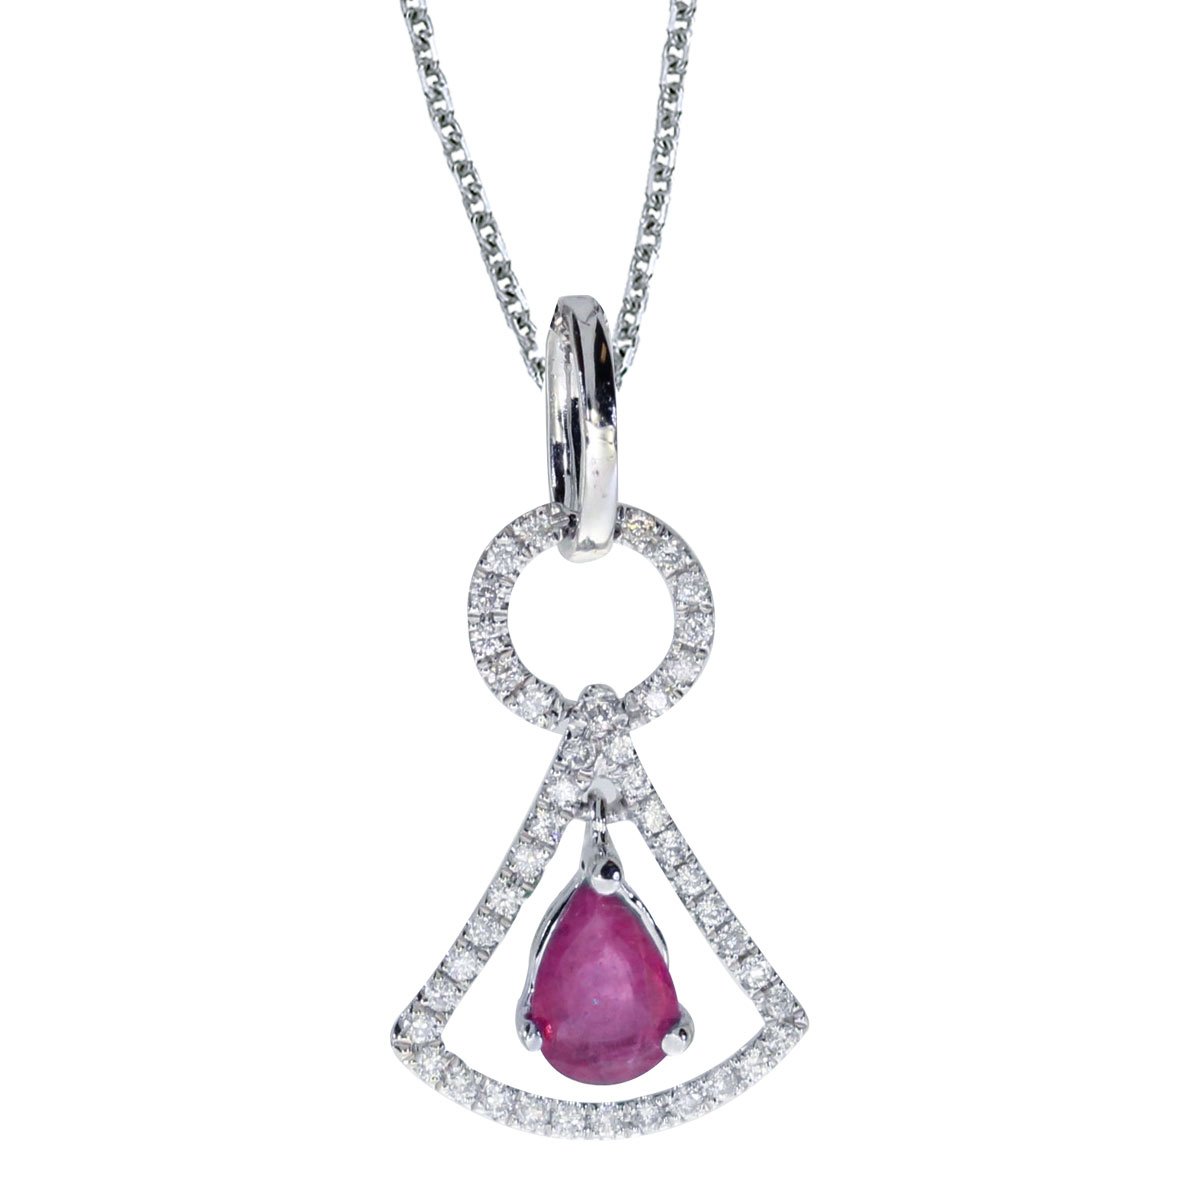 This unique 14k white gold  pendant features  a striking 6x4 mm pear ruby and .16 carats of shimm...